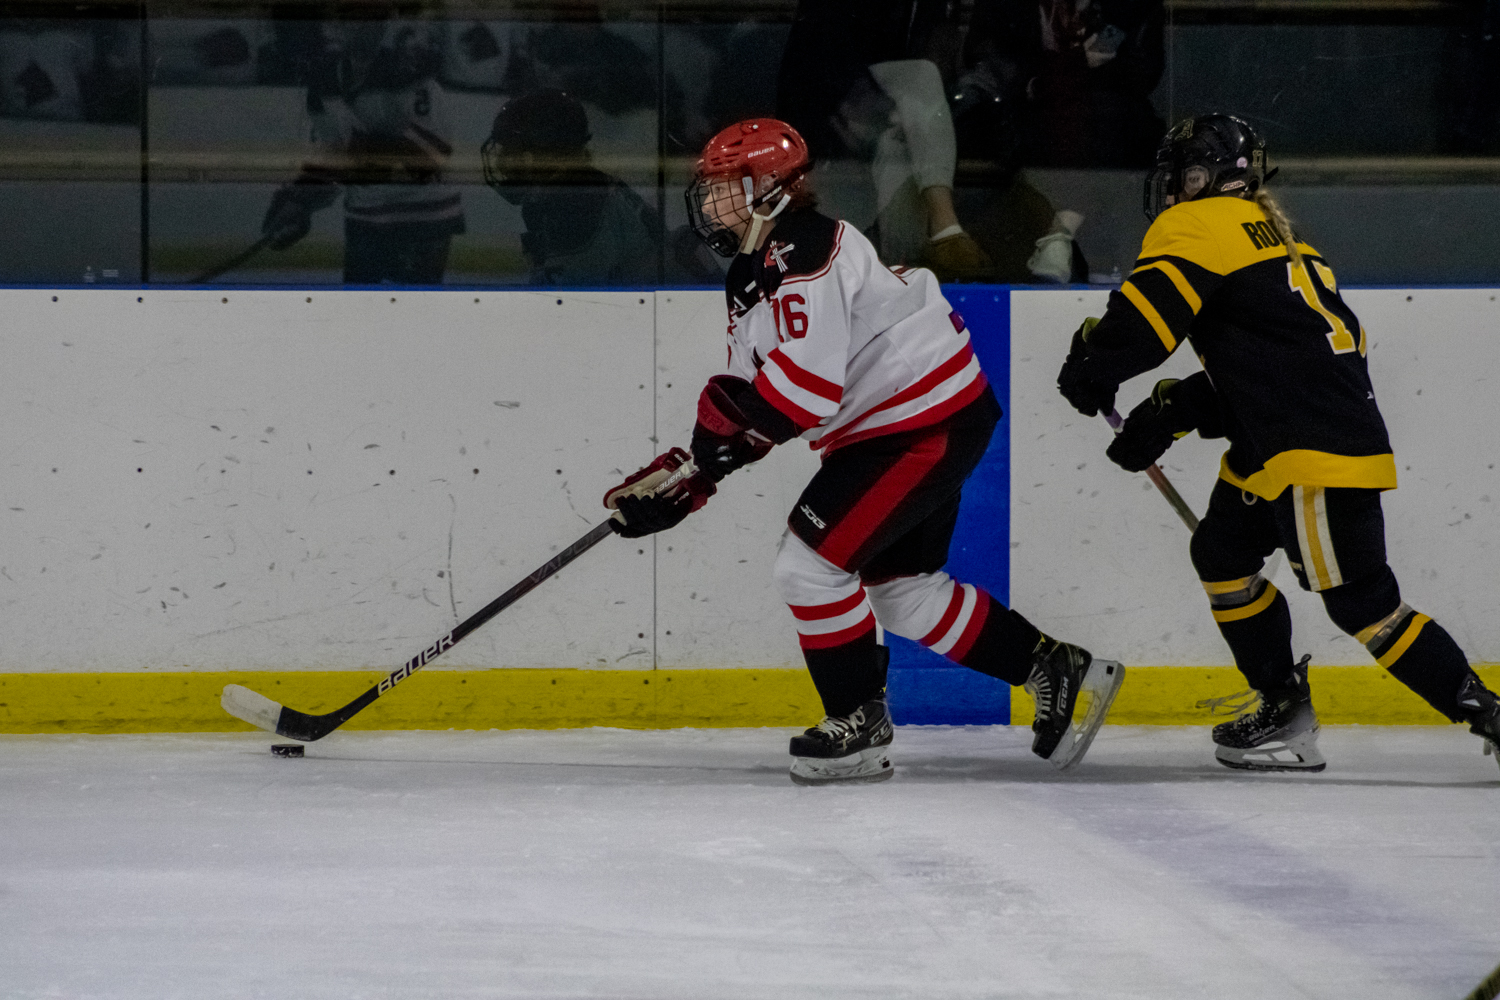 Women's Hockey falls in high-scoring contest with #10 UM Dearborn